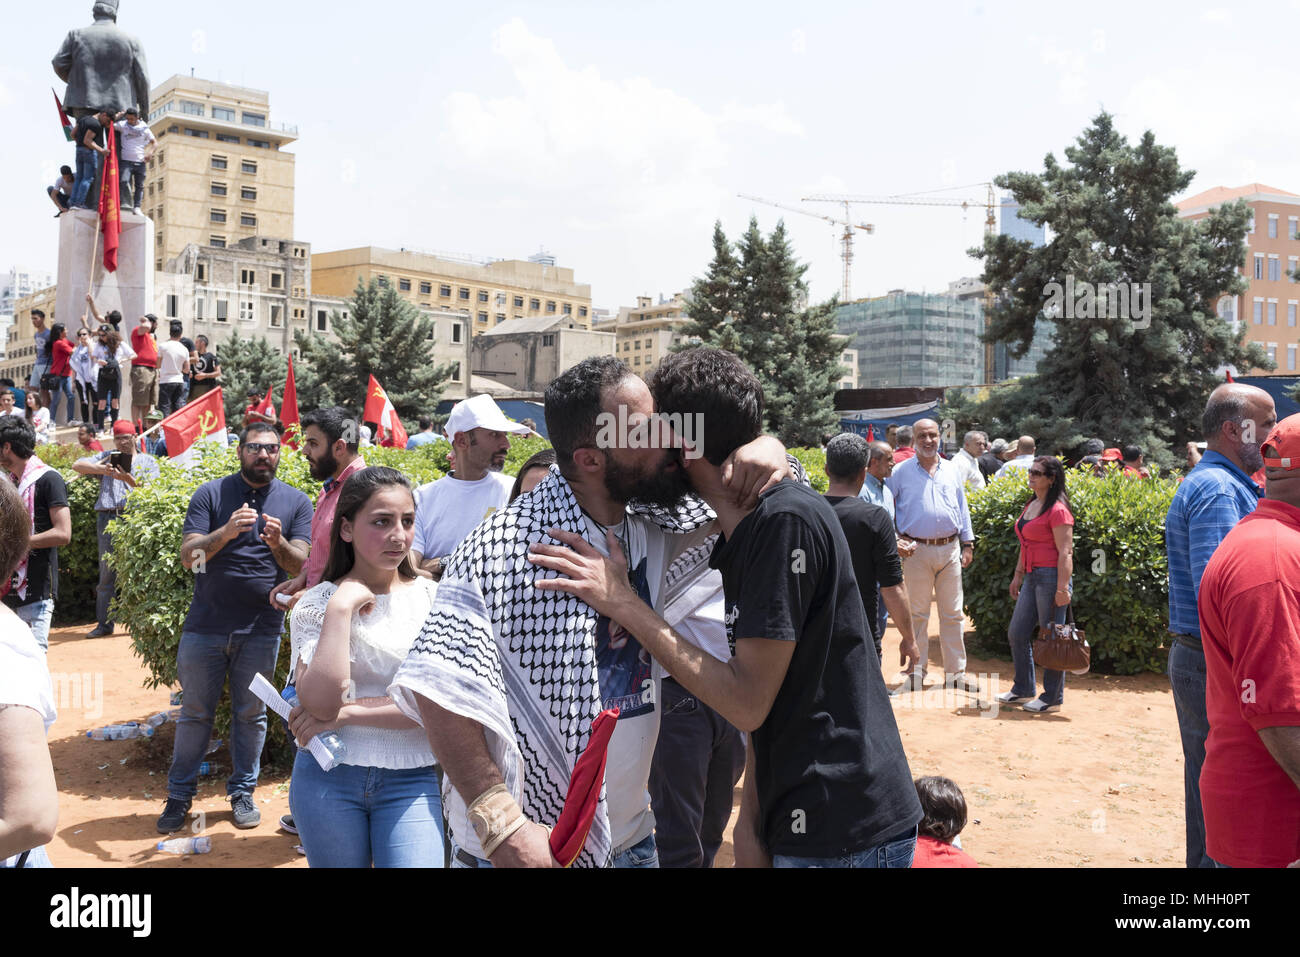 Beirut, Lebanon. 1st May, 2018. Two men embrace during a march organized by Members of the Lebanese Communist Party and other worker rights groups in celebration of International Workers' Day. Credit: Antoine Abou-Diwan/SOPA Images/ZUMA Wire/Alamy Live News Stock Photo